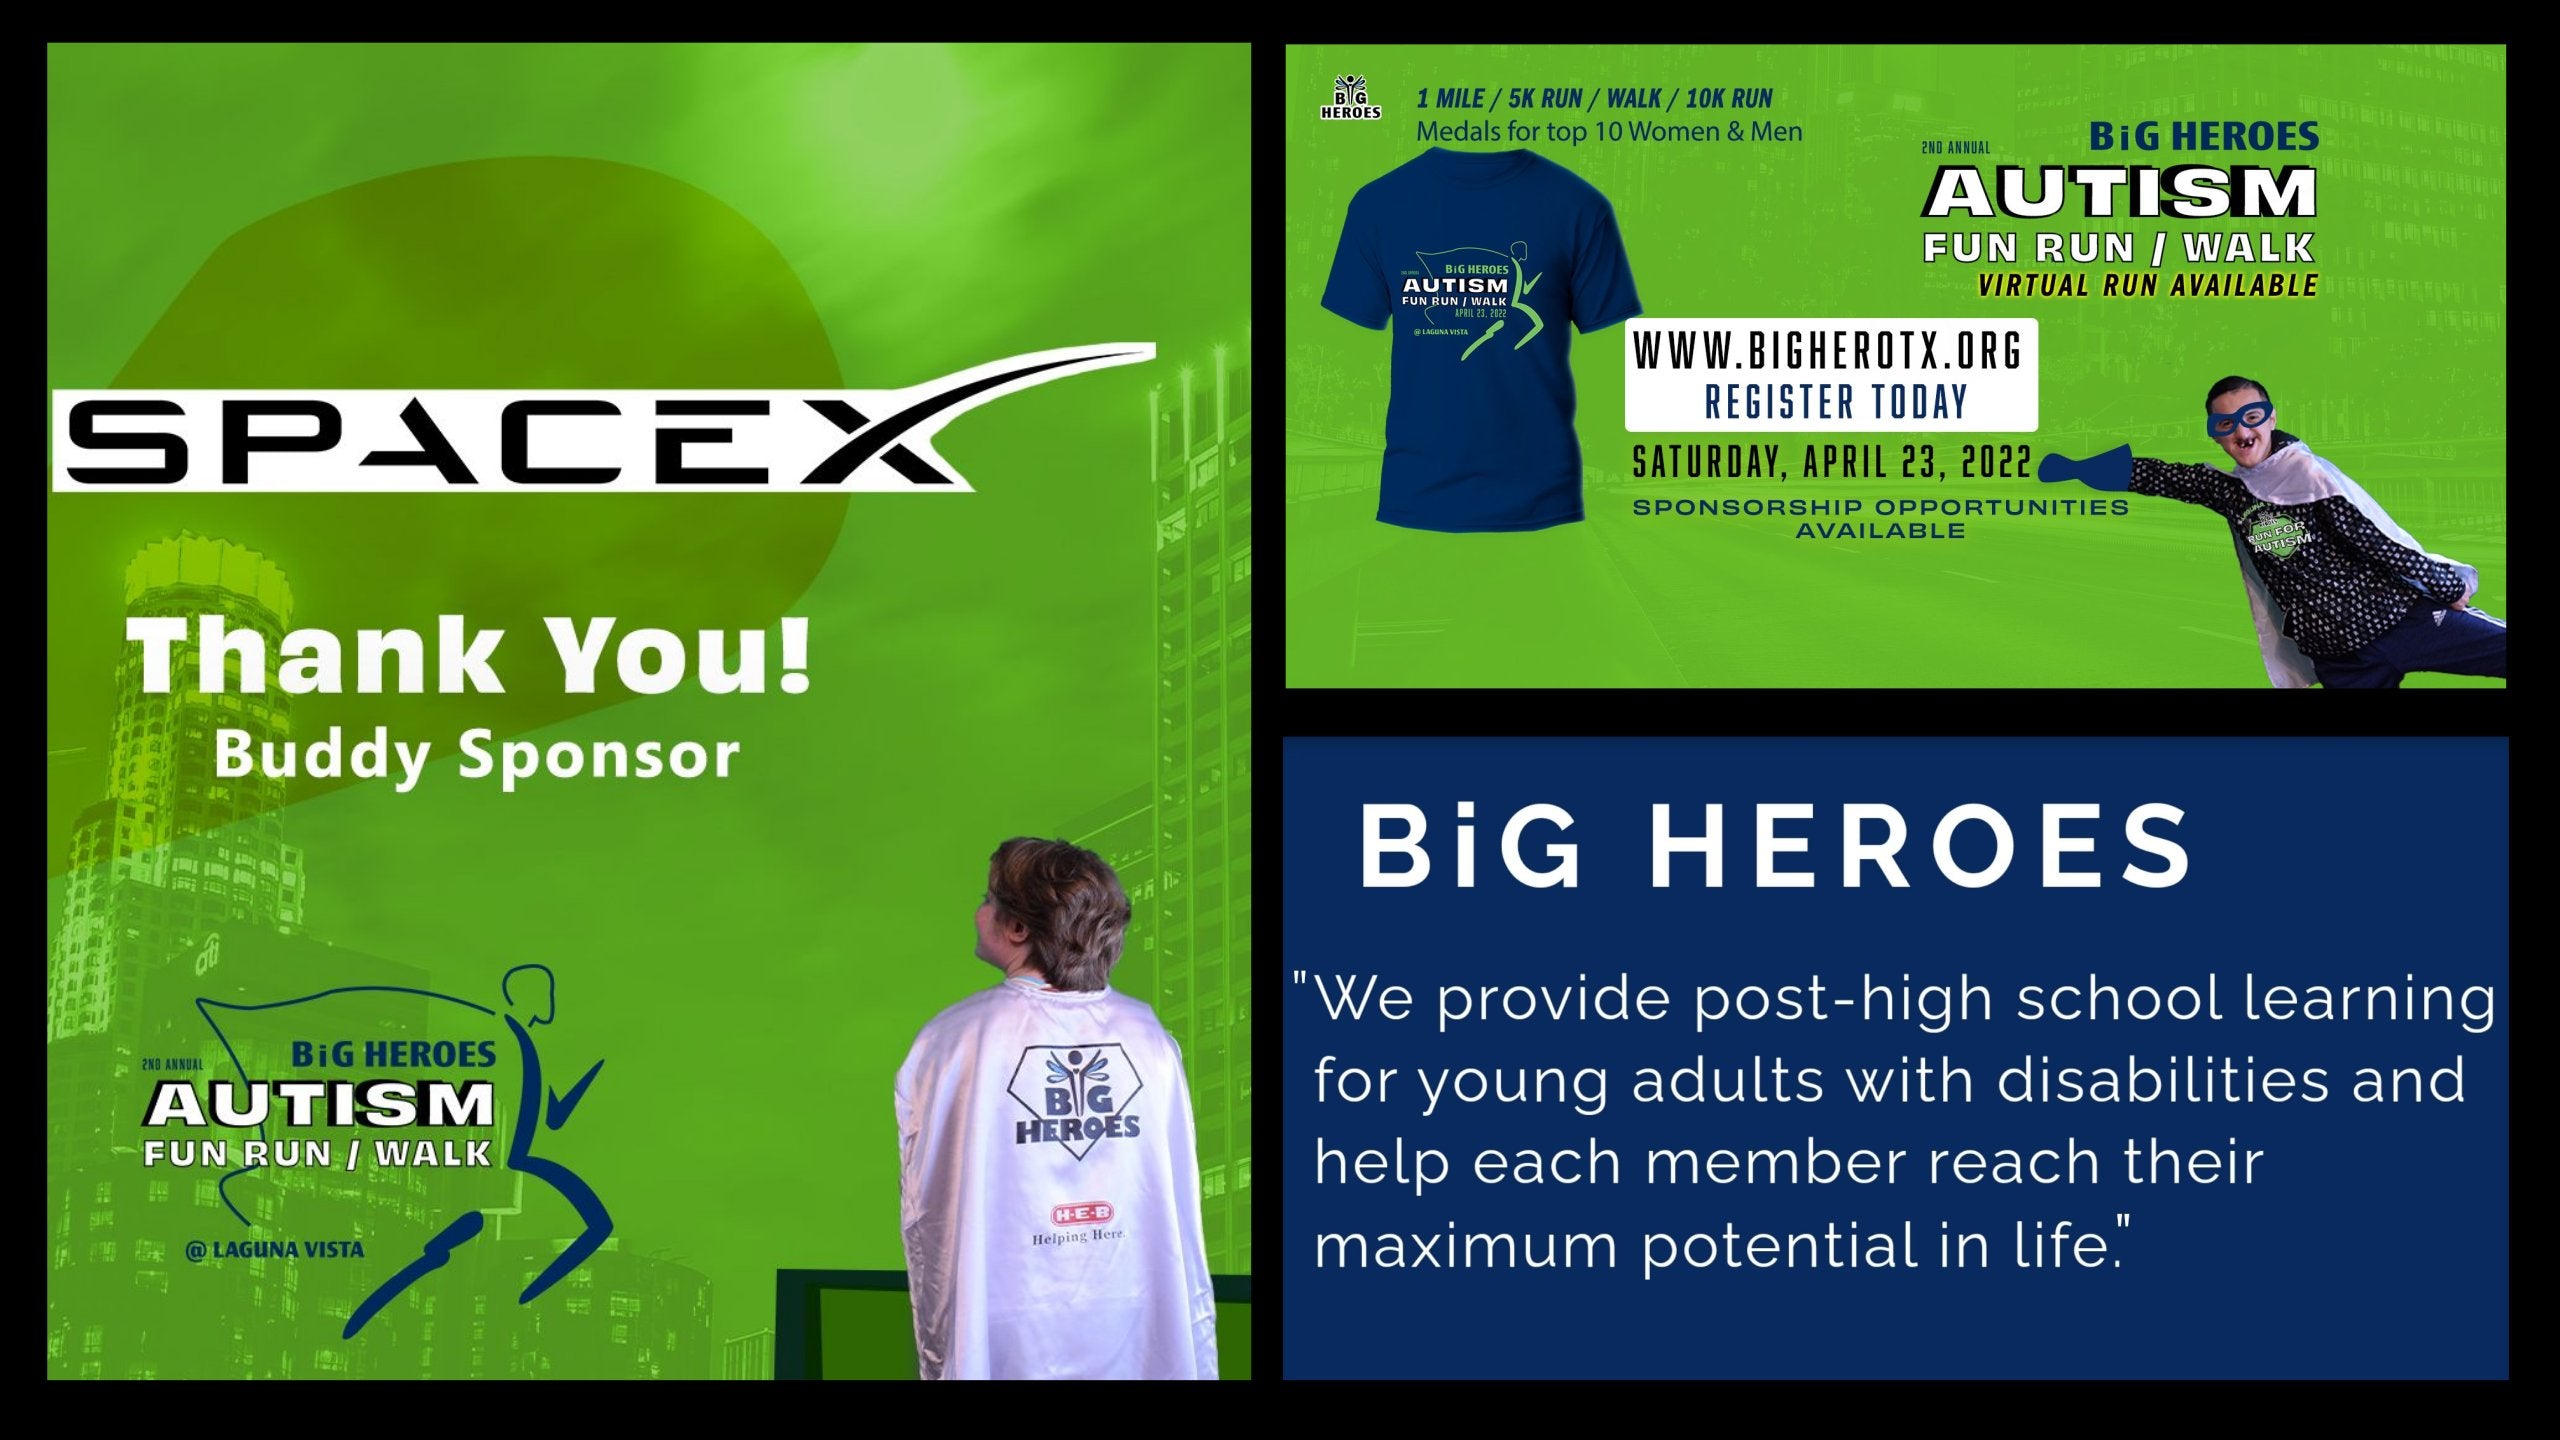 SpaceX is a sponsor of BiG Heroes 2nd Annual 'Fun Run/Walk' Autism fundraiser in South Texas